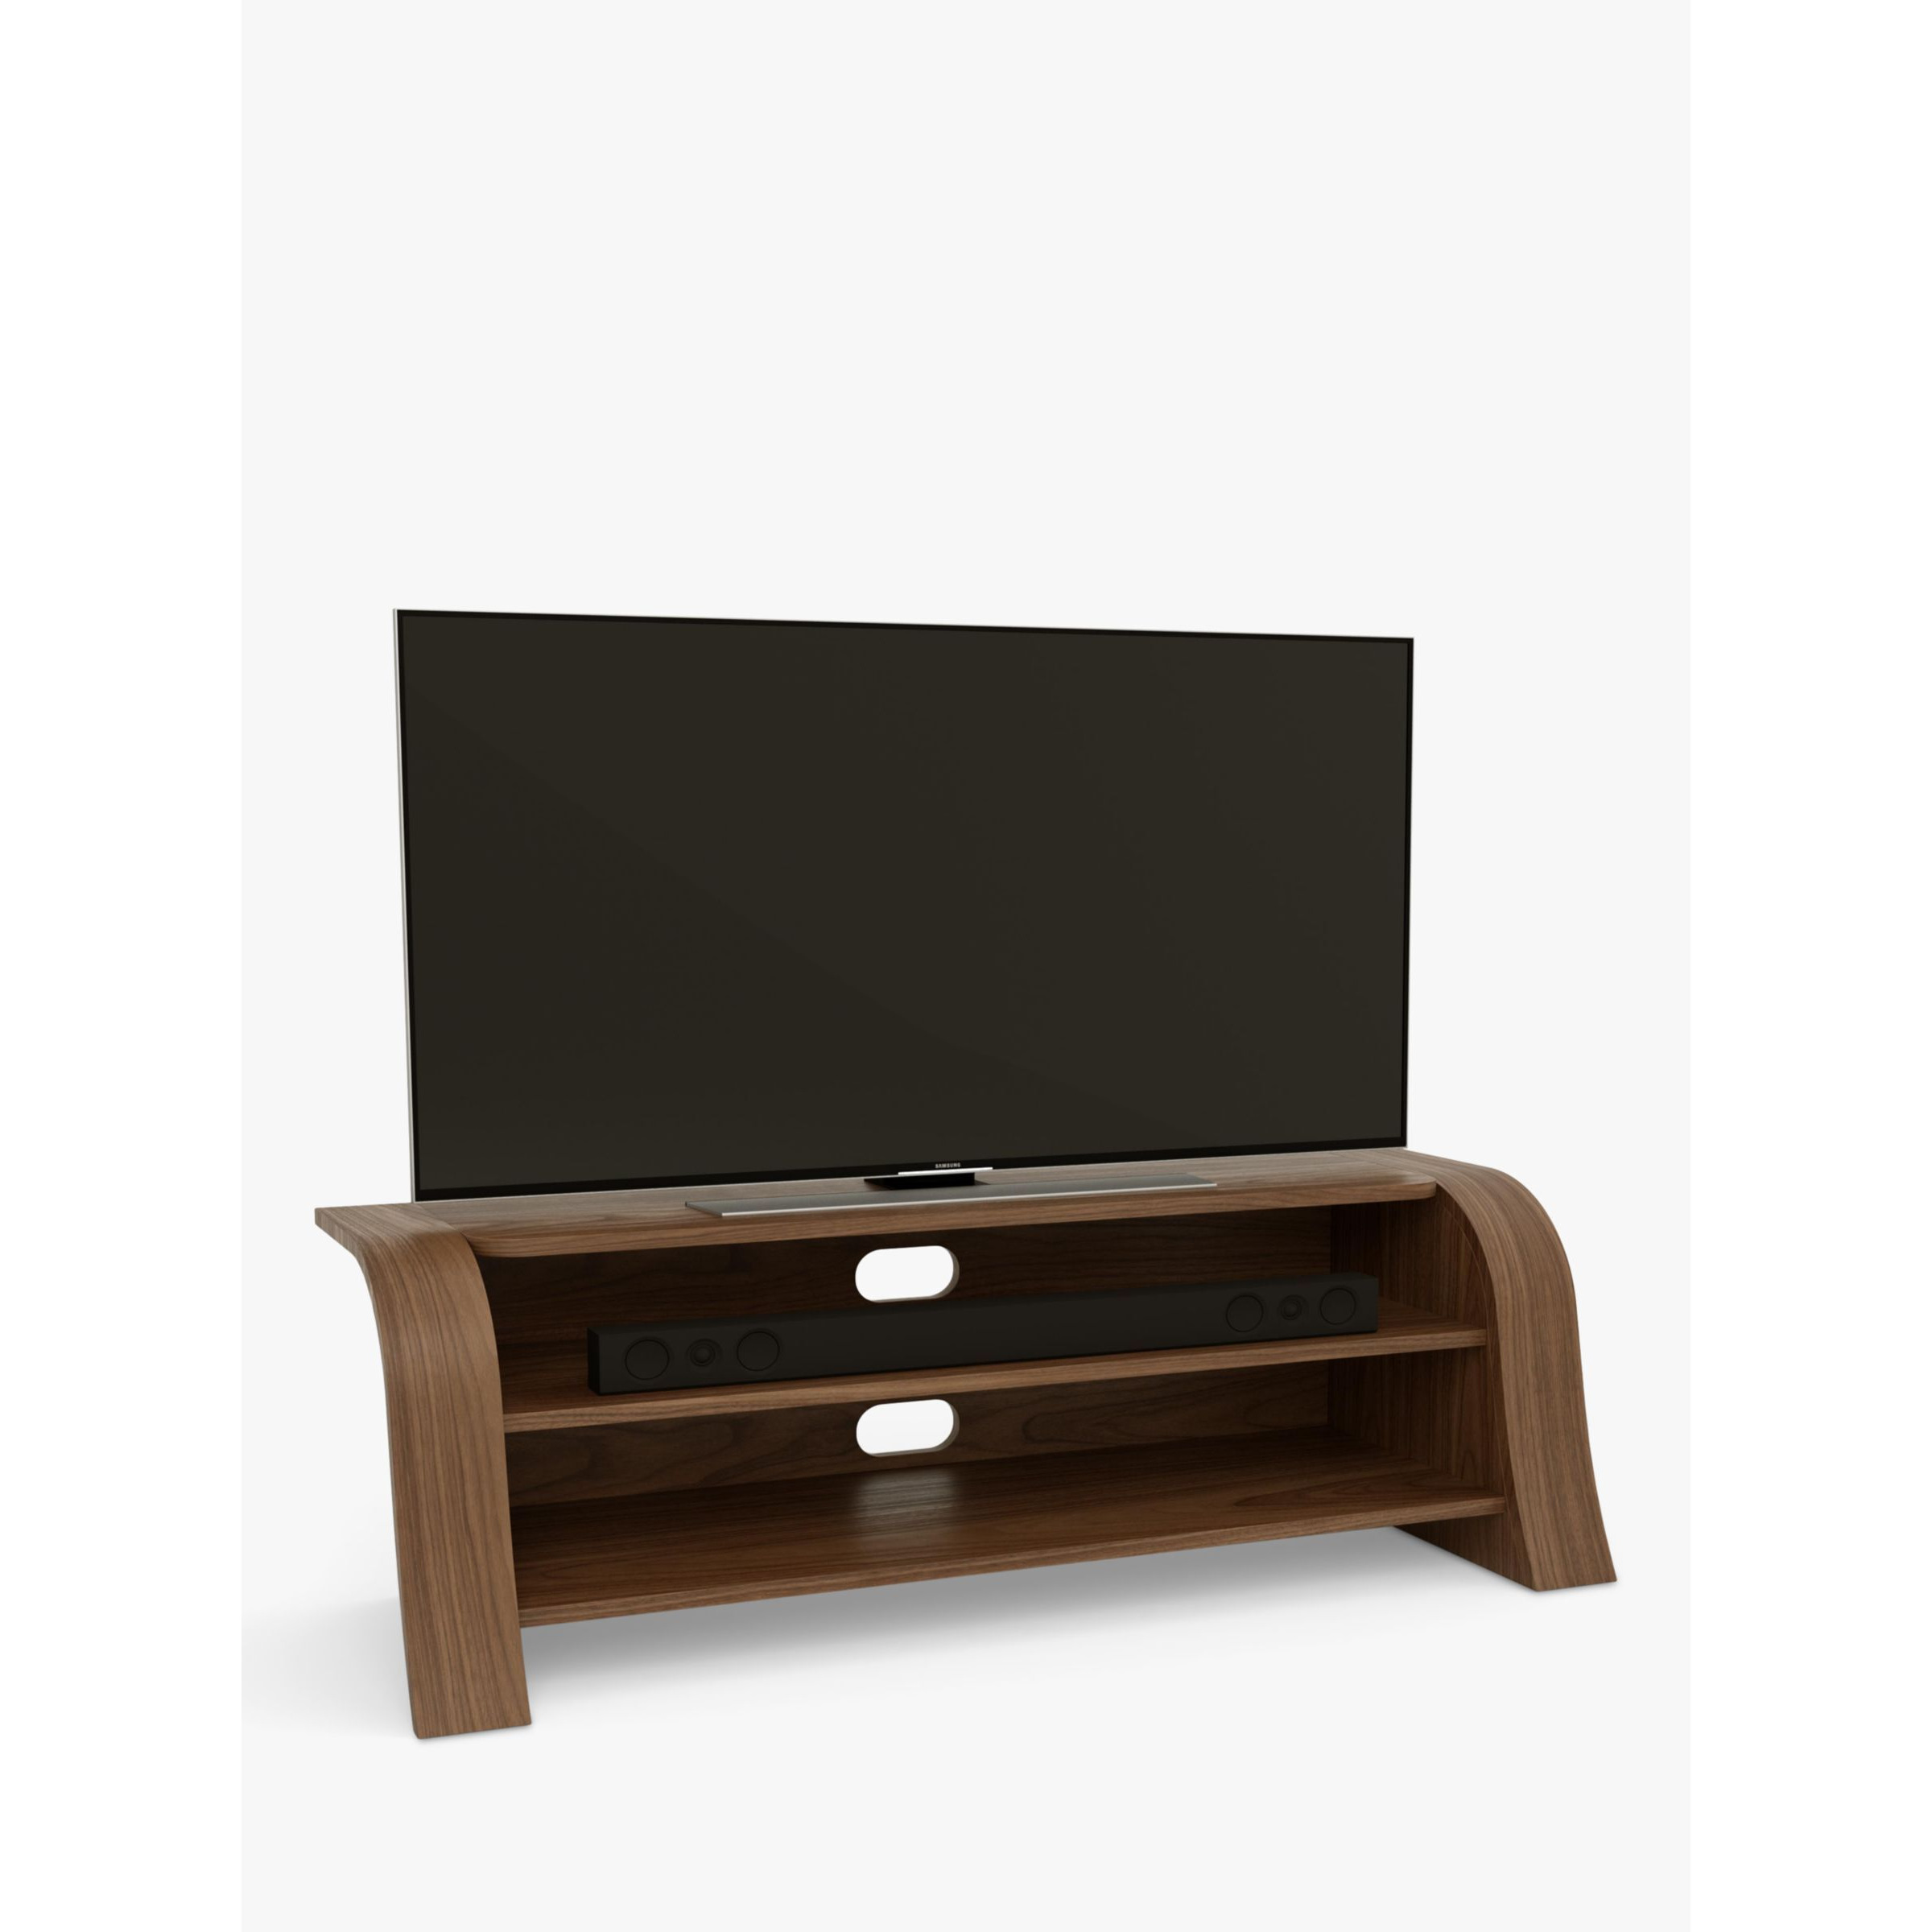 "Tom Schneider Lexi 125 TV Stand for TVs up to 55""" - image 1